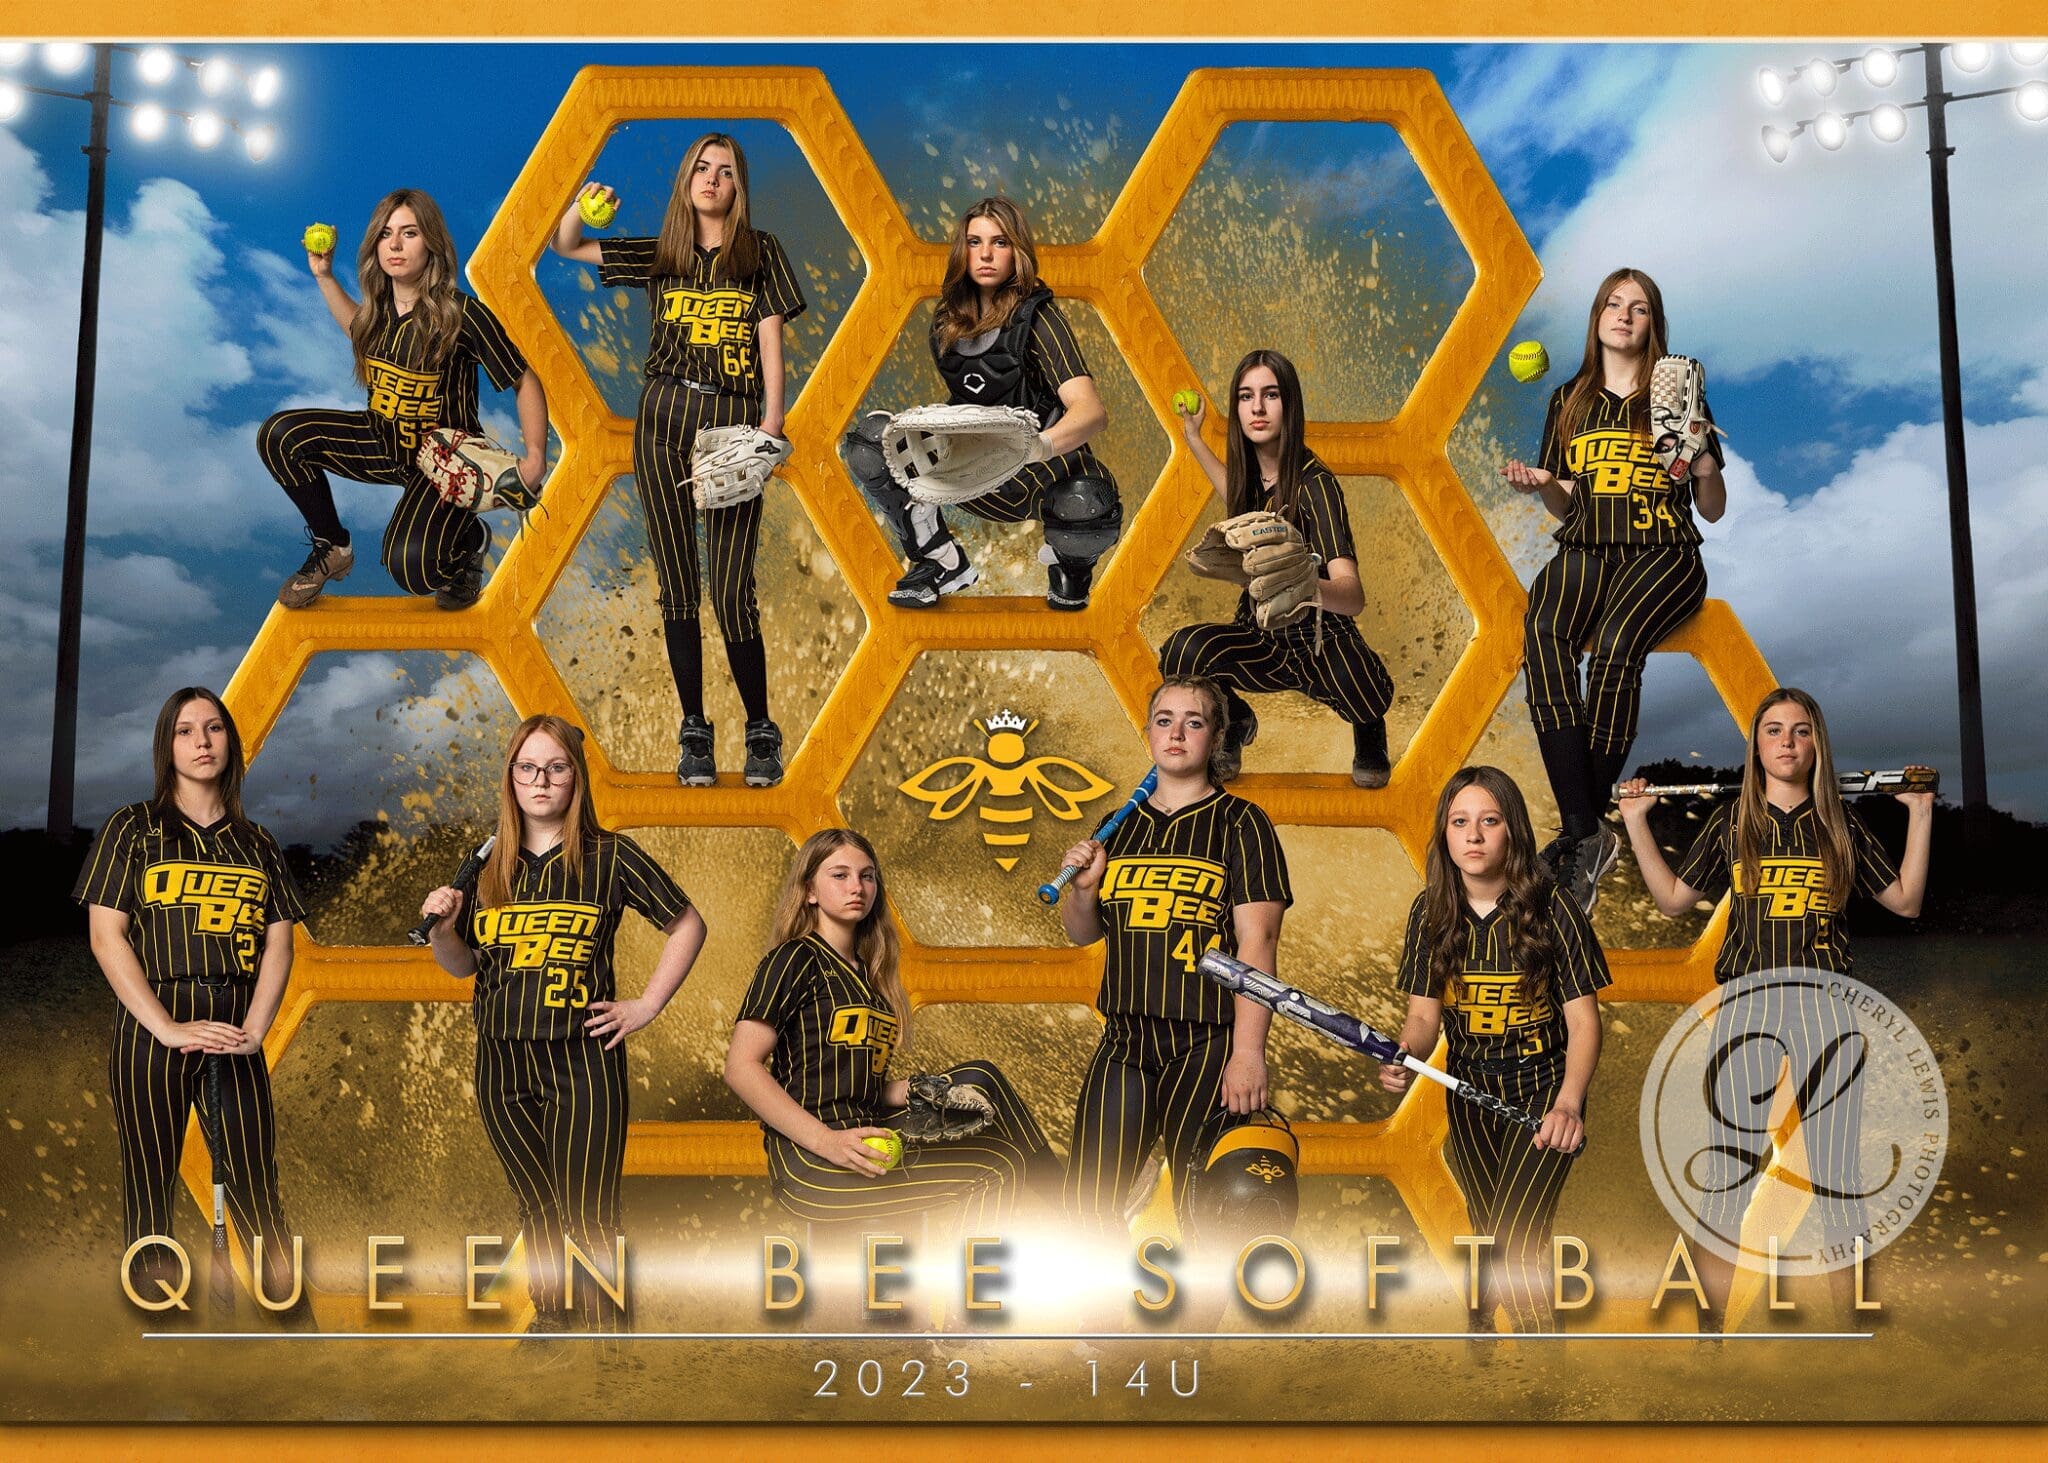 A collage of the queen bee softball team.